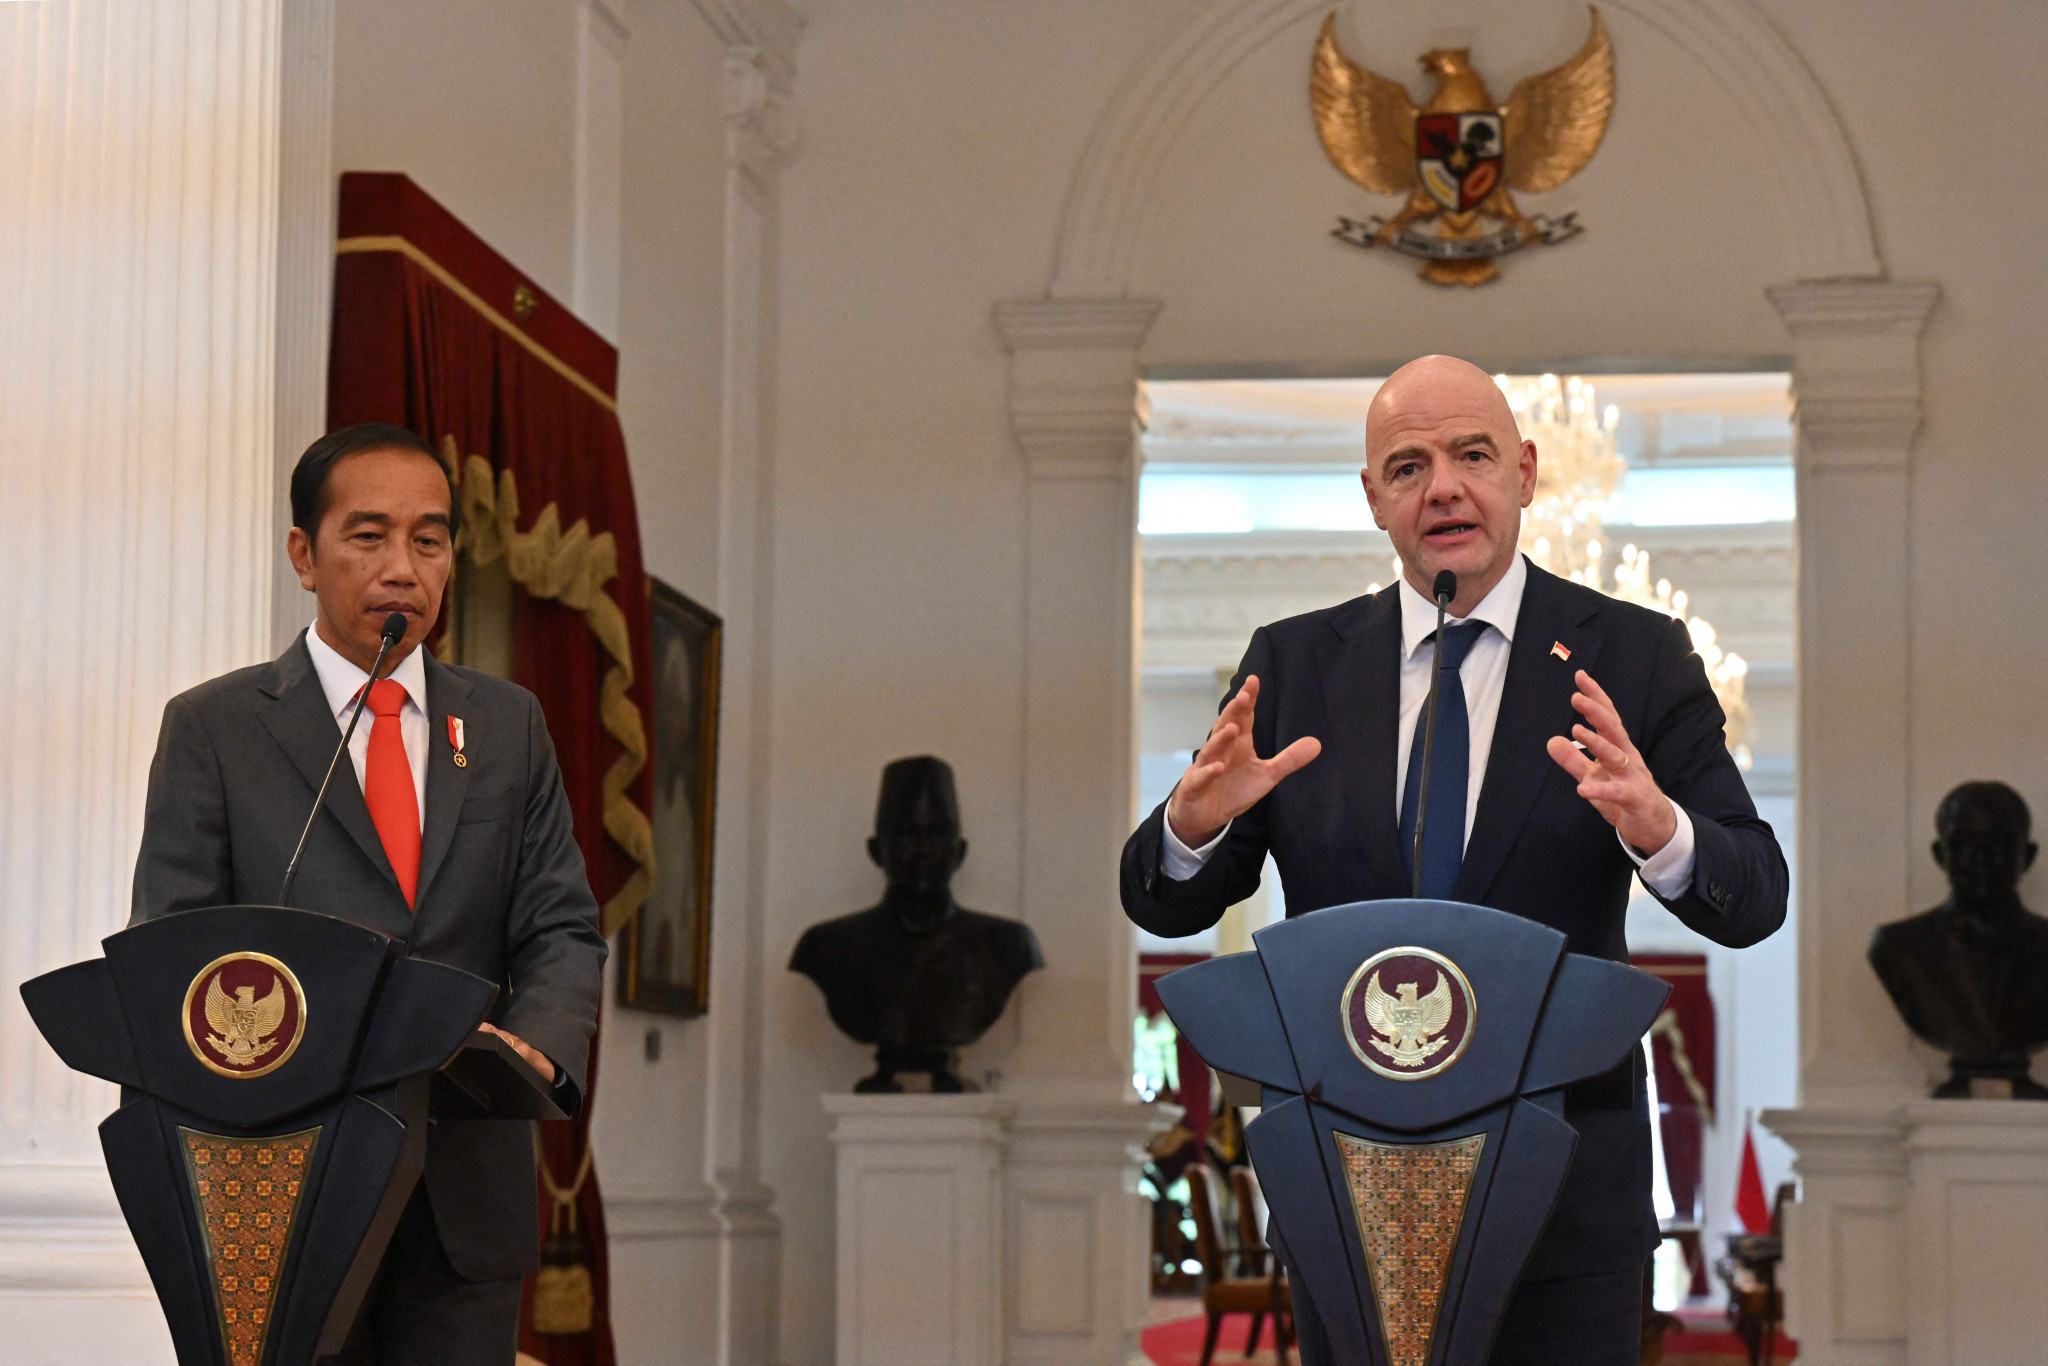 Joko Widodo, left, and Gianni Infantino, right, agreed reform is needed in Indonesian football ©Getty Images